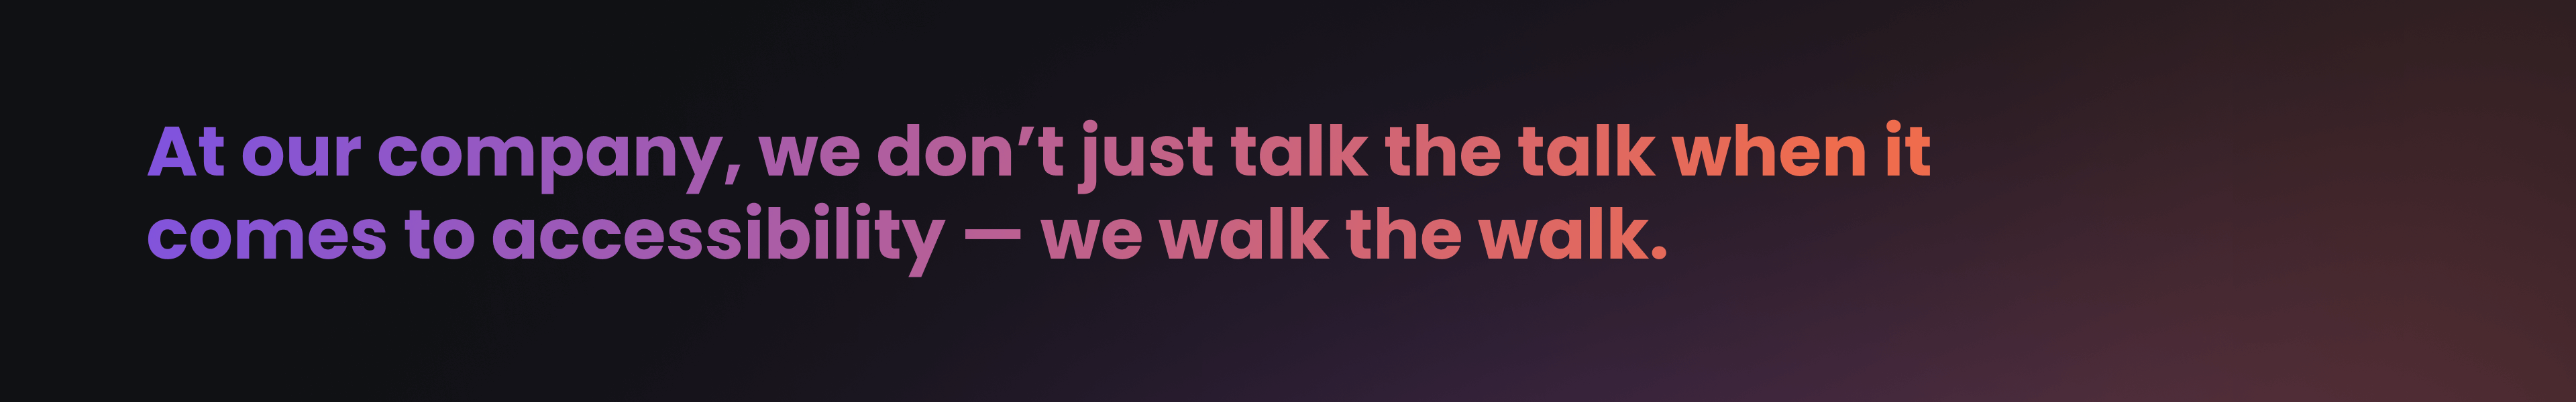 At our company, we don't just talk the talk when it comes to accessibility — we walk the walk